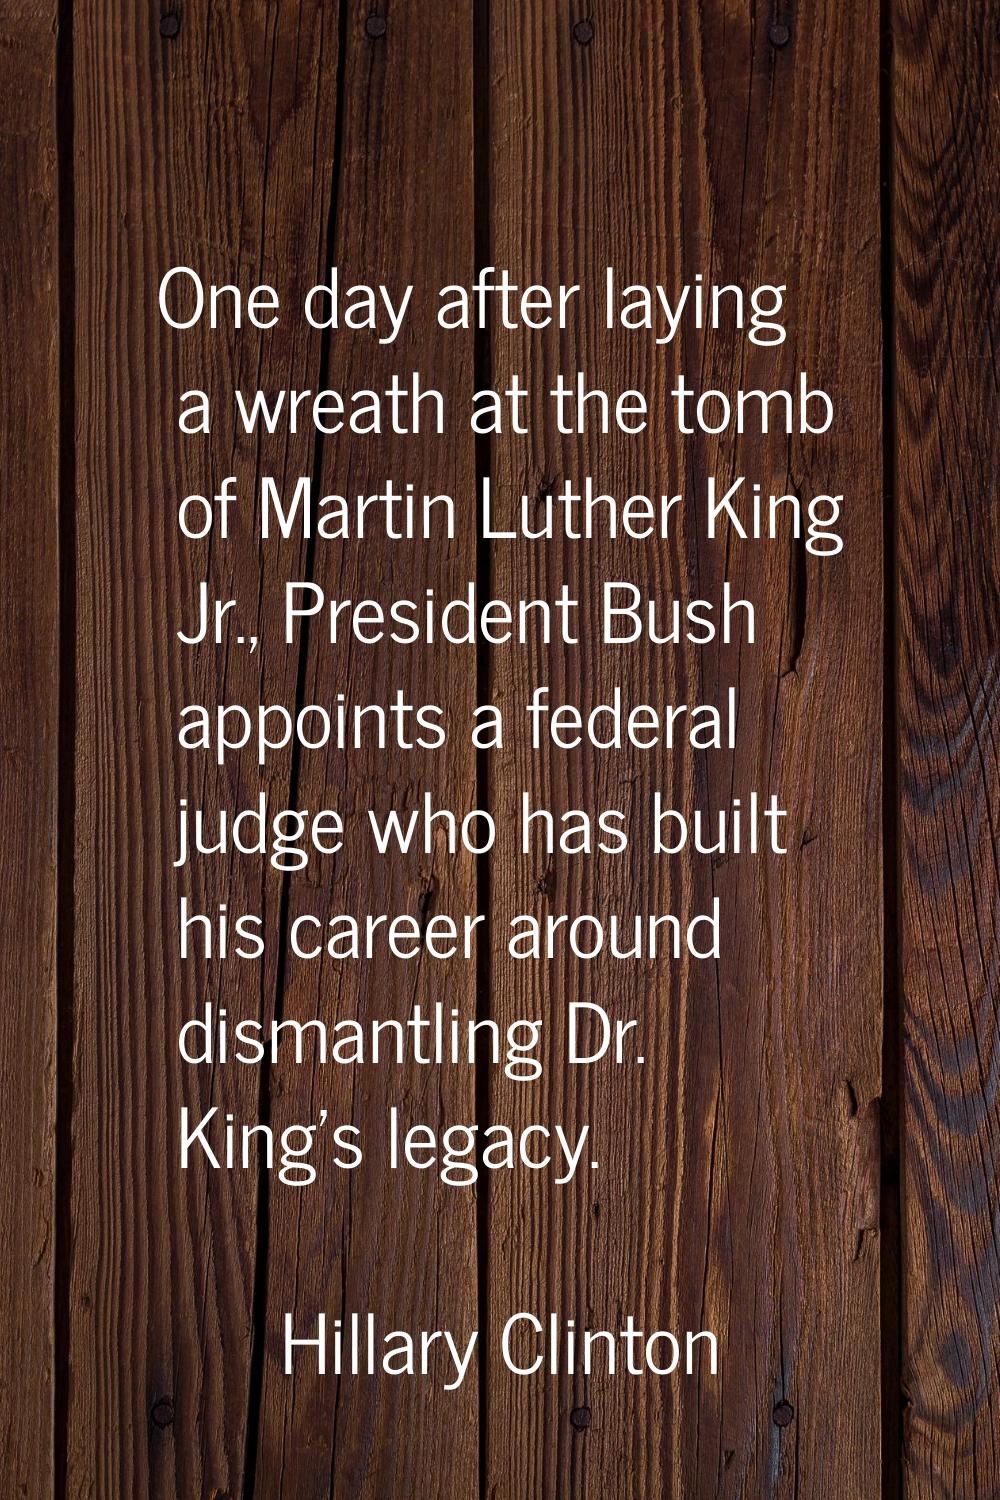 One day after laying a wreath at the tomb of Martin Luther King Jr., President Bush appoints a fede